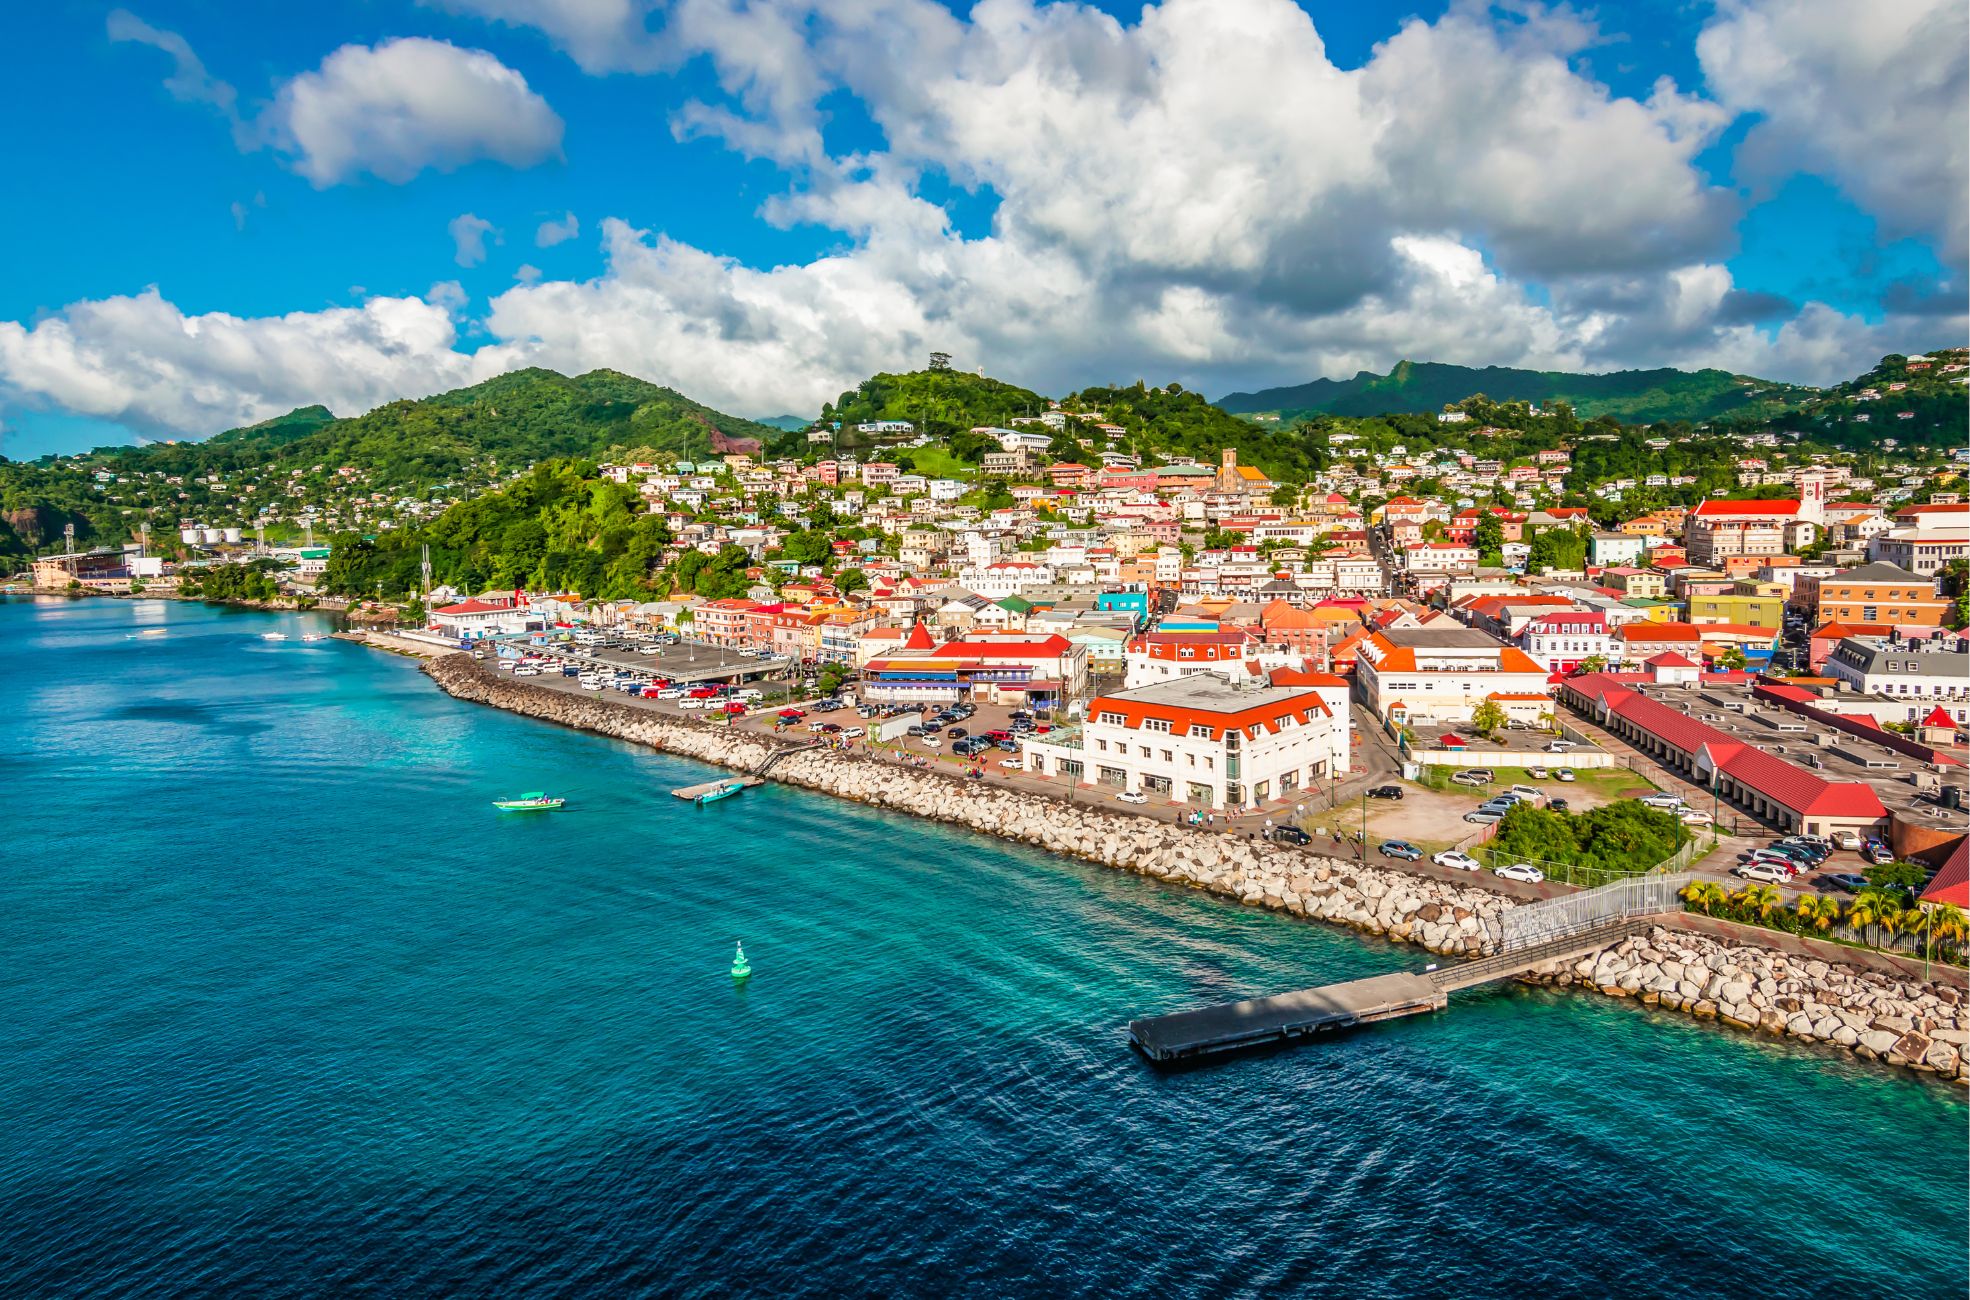 An aerial view of Grenada.